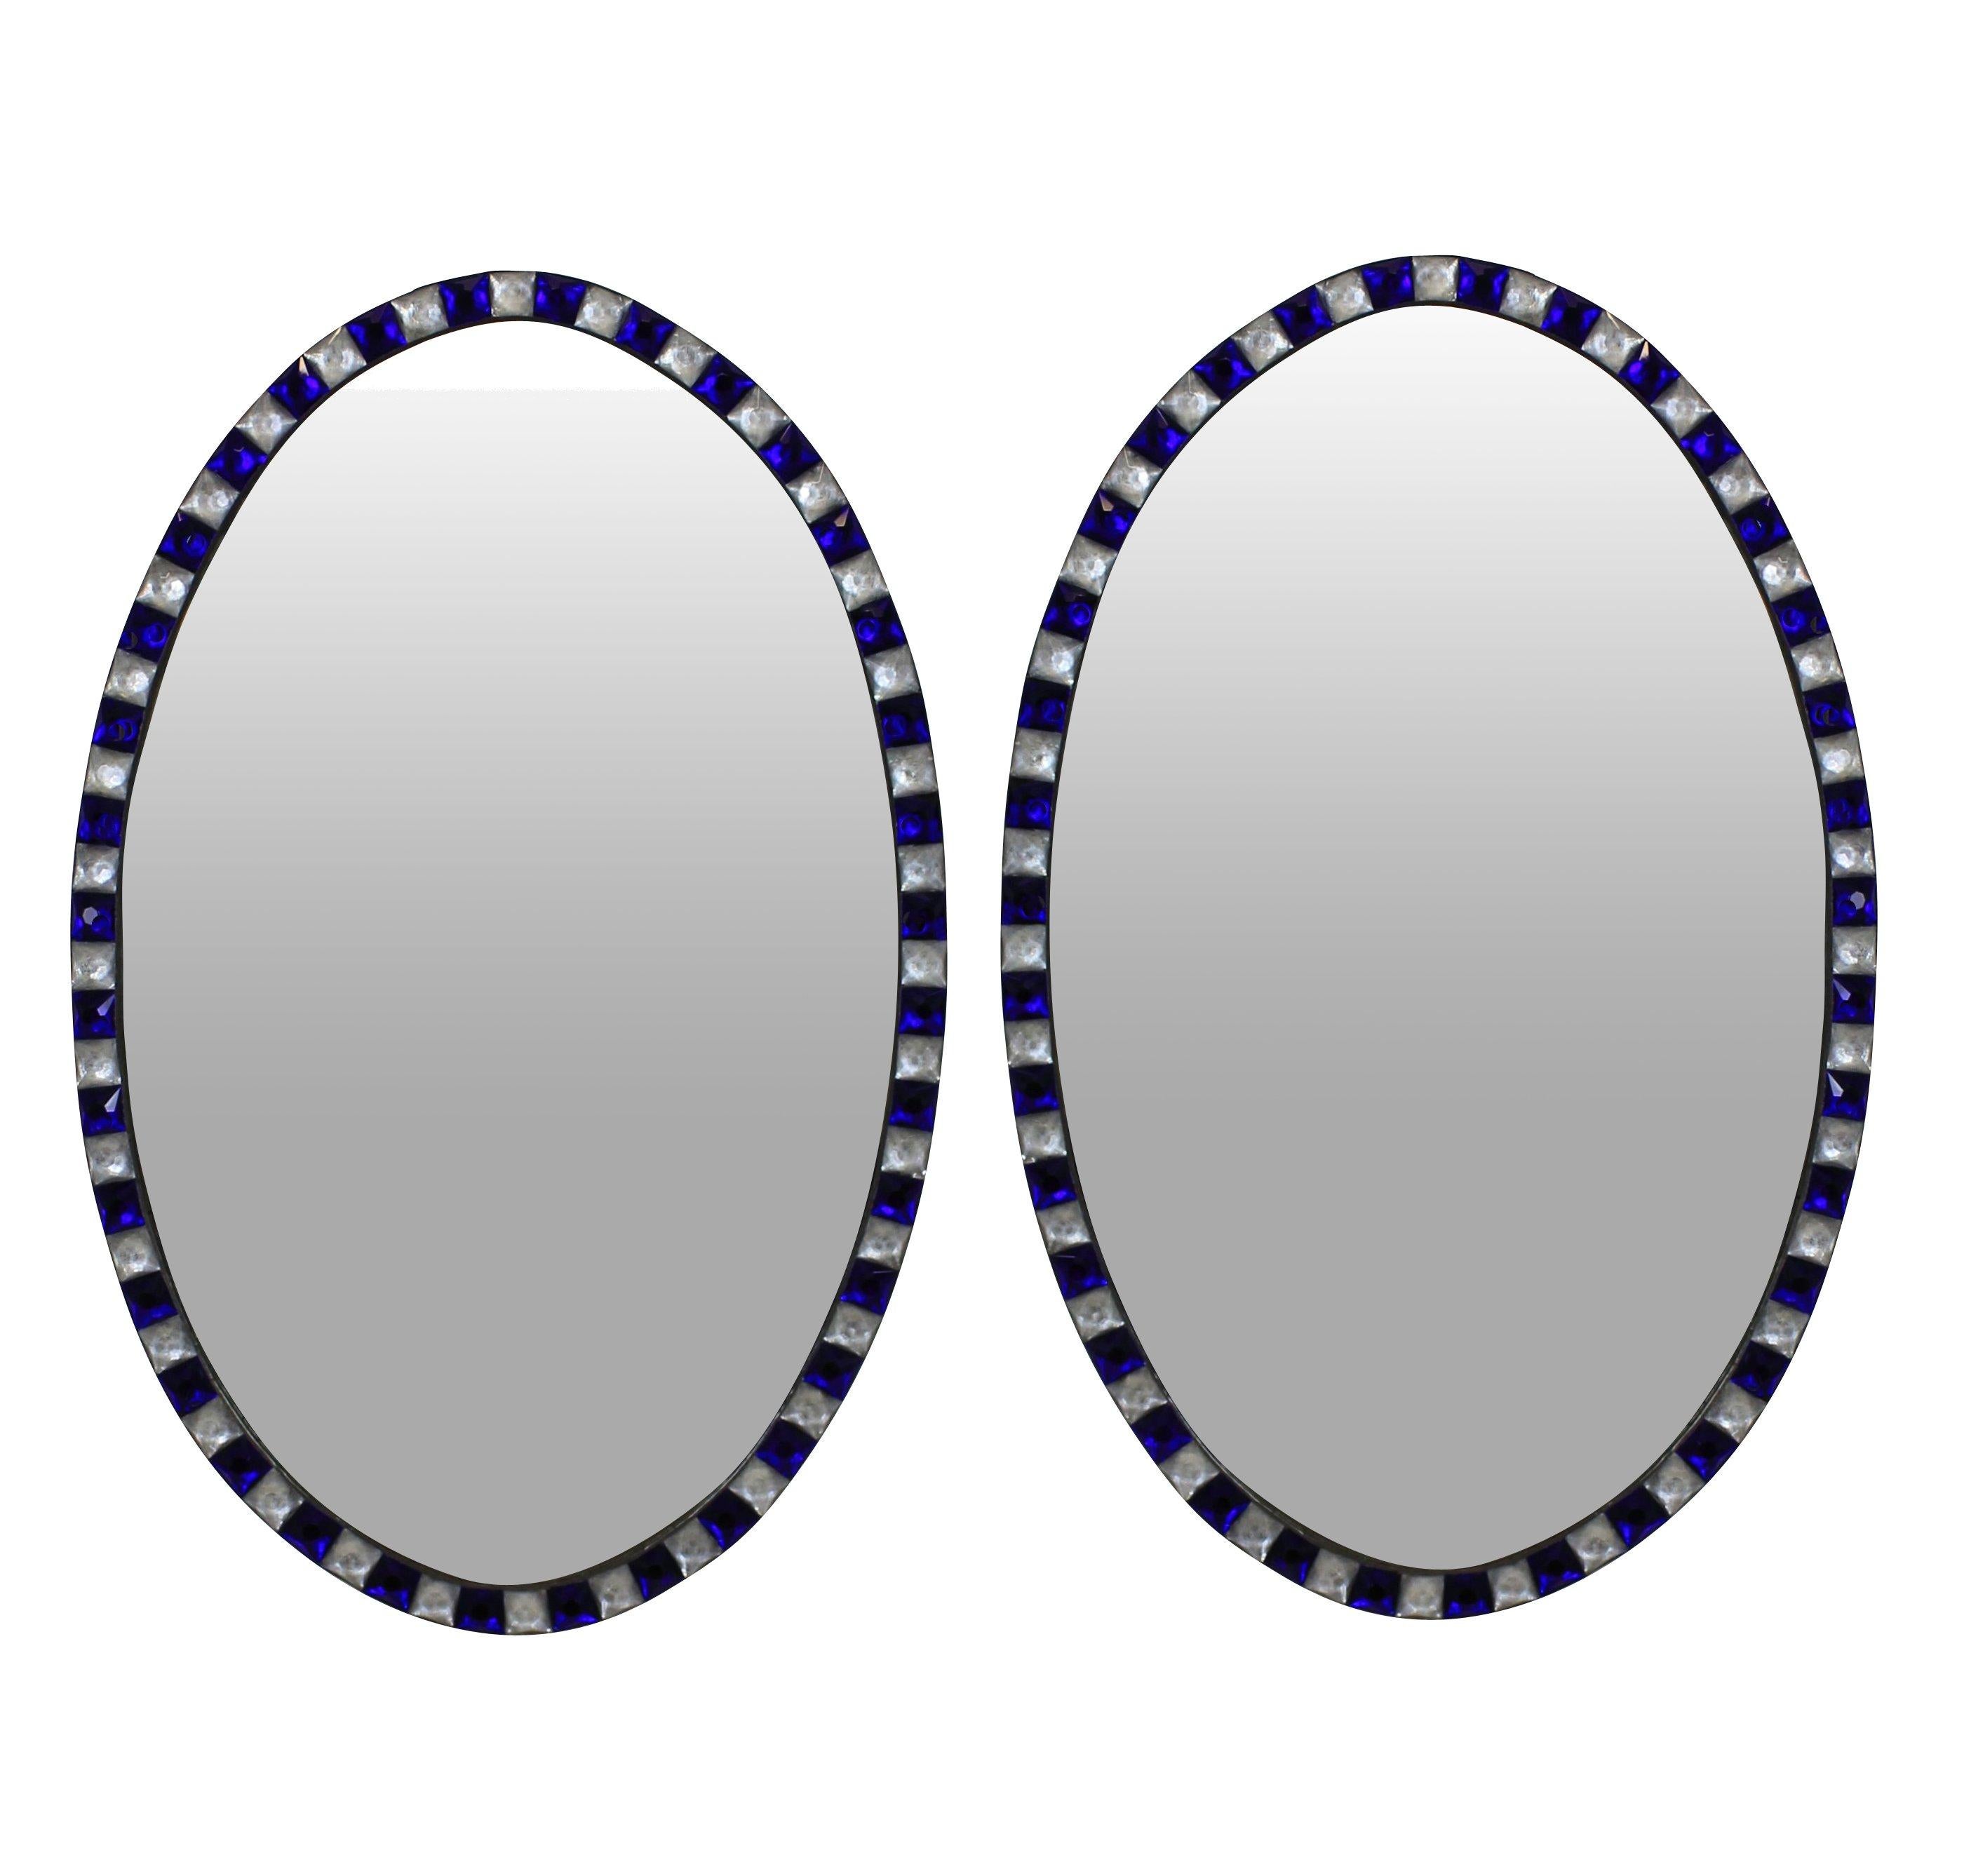 Pair of Stunning Irish Mirrors with Faceted Rock Crystal and Blu Glass Borders 1